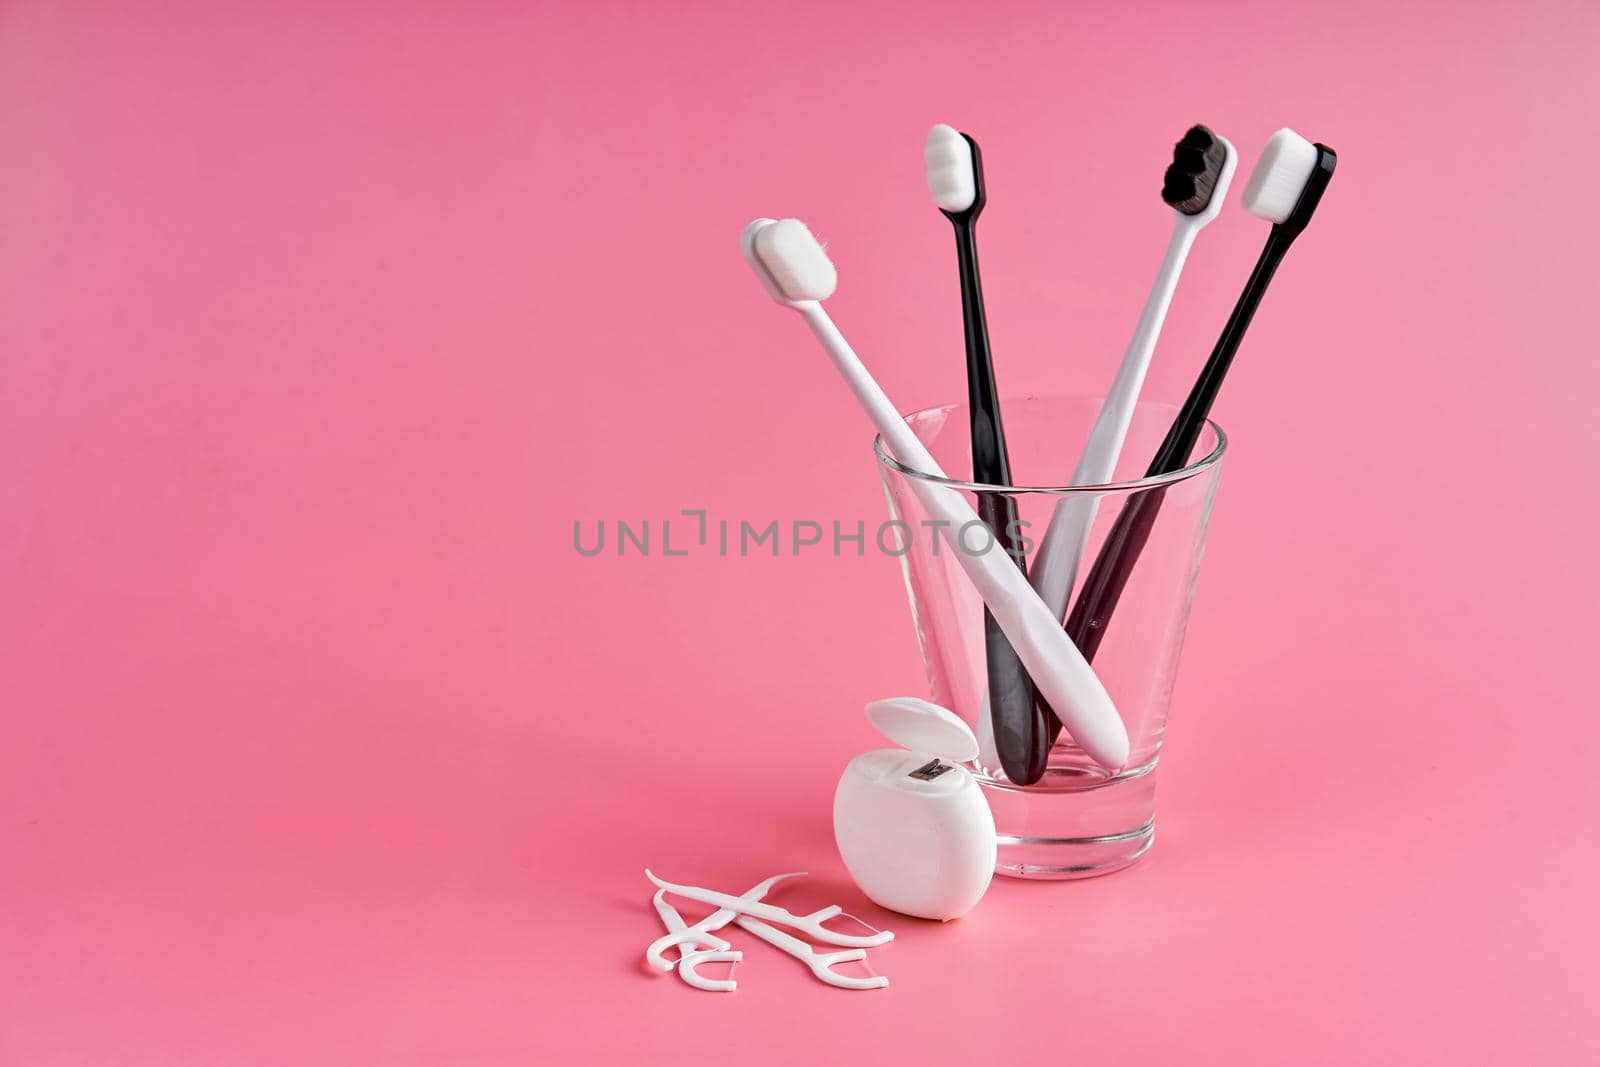 Fashionable toothbrush with soft bristles. Popular toothbrushes. Hygiene trends. Oral hygiene kit. Toothbrushes in glass, floss thread and toothpicks on a pink background by Try_my_best